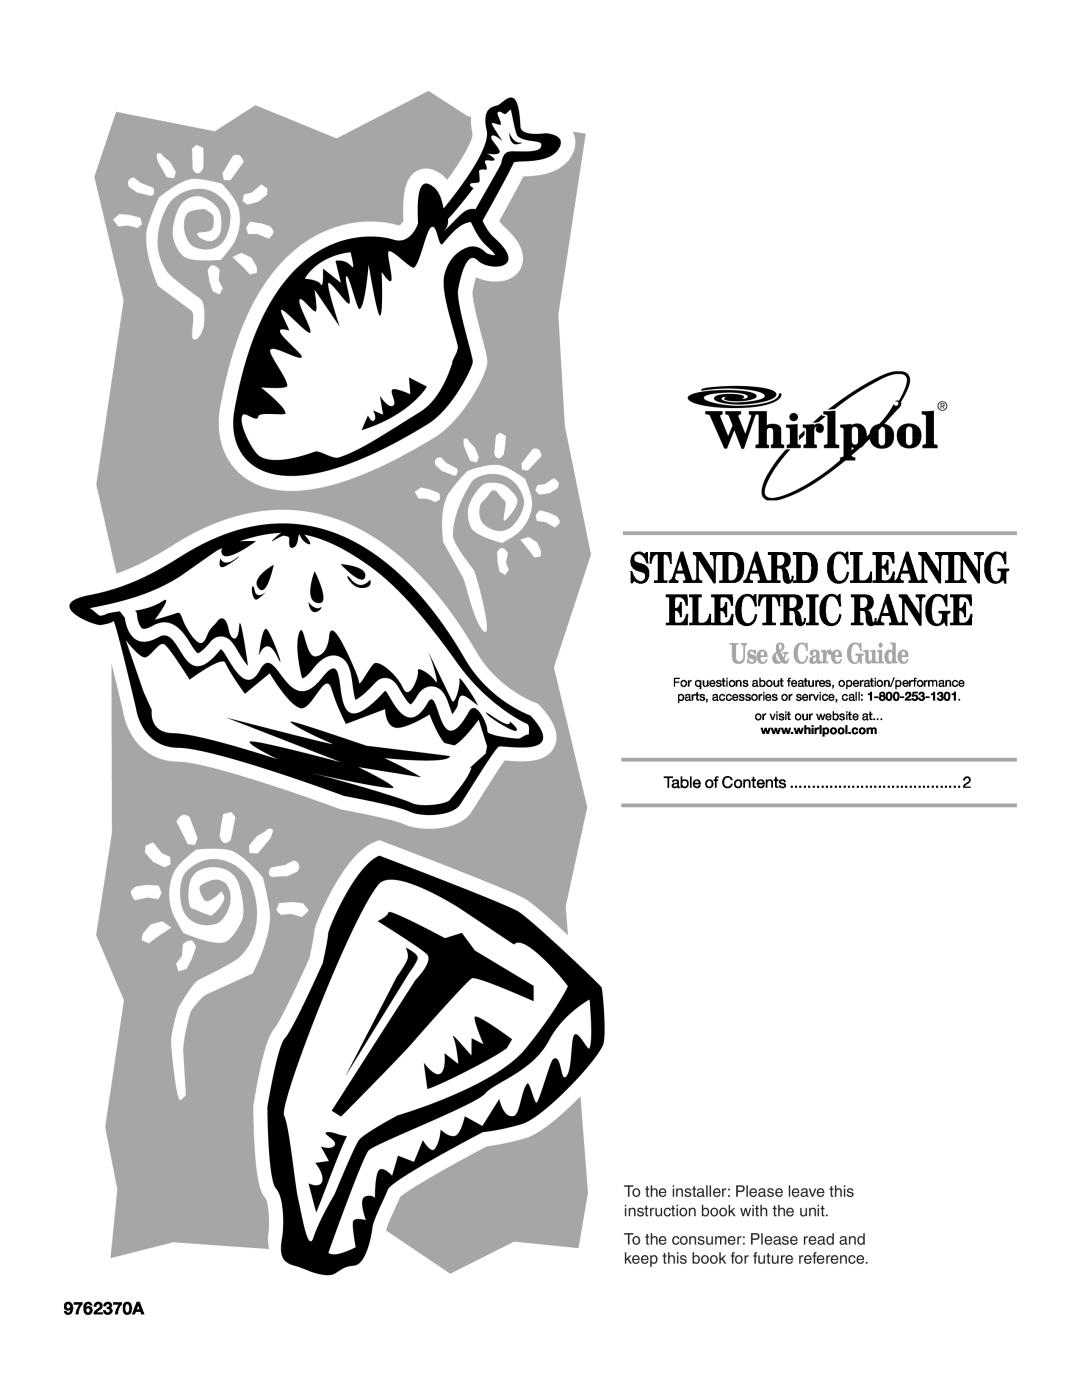 Whirlpool RF3020XKQ4 manual 9762370A, Standard Cleaning Electric Range, Use & Care Guide, or visit our website at 